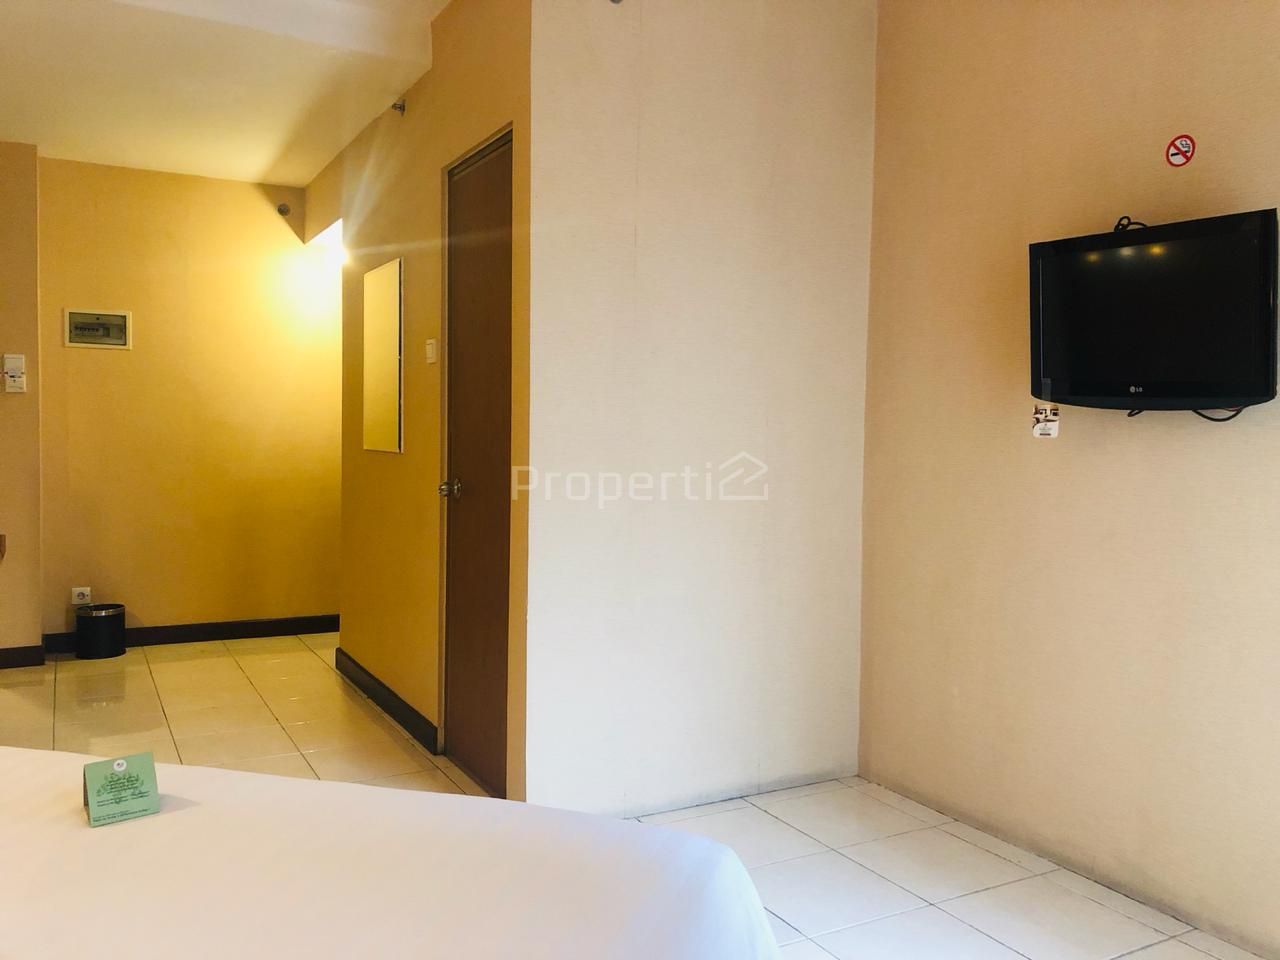 1BR Apartment Unit at The Majesty, 1st Floor, Kota Bandung